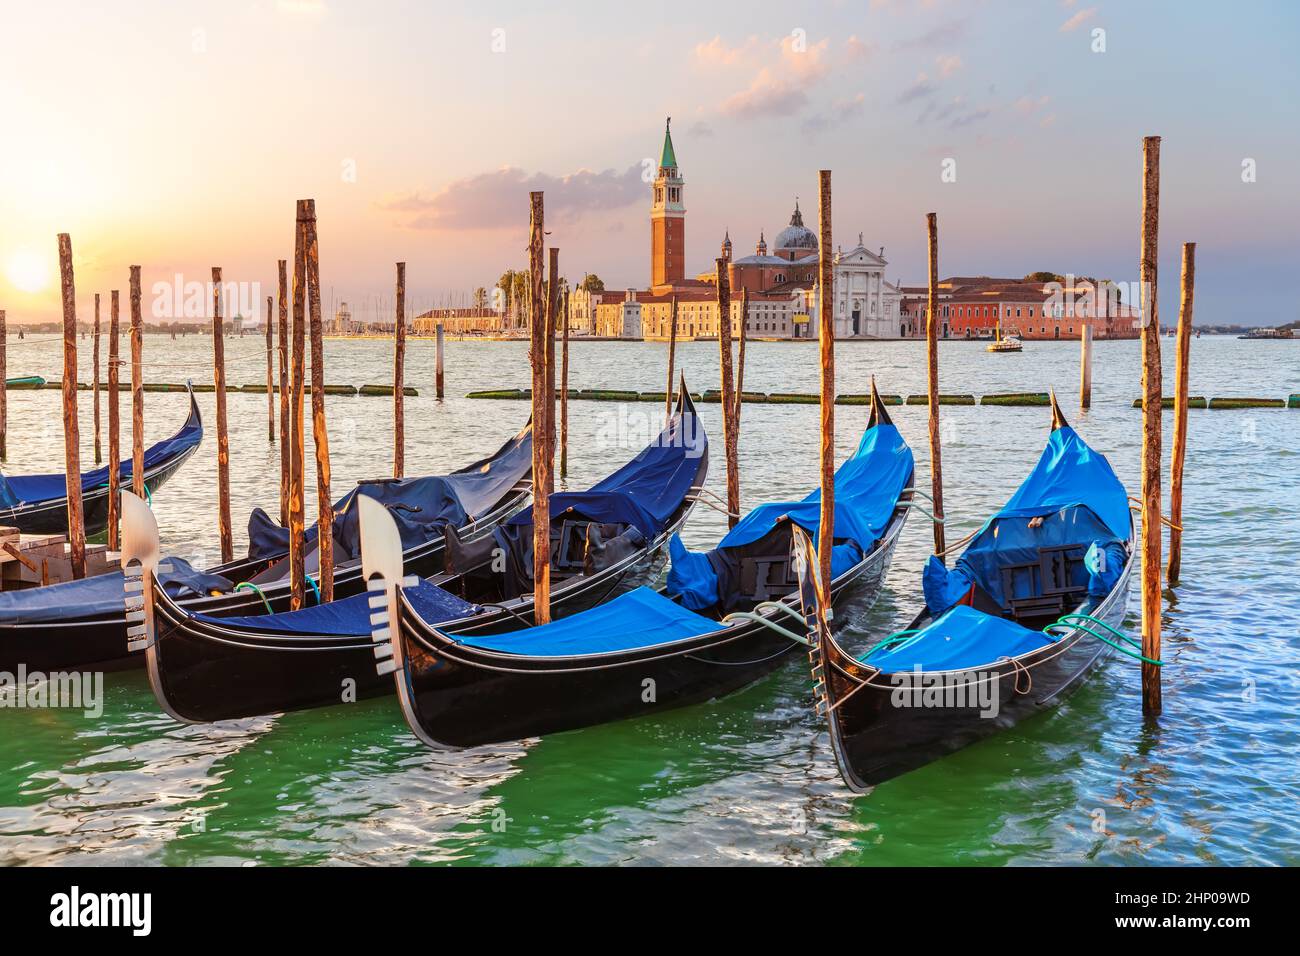 Gondolas and St. George Monastery in the background, Venice, Italy. Stock Photo